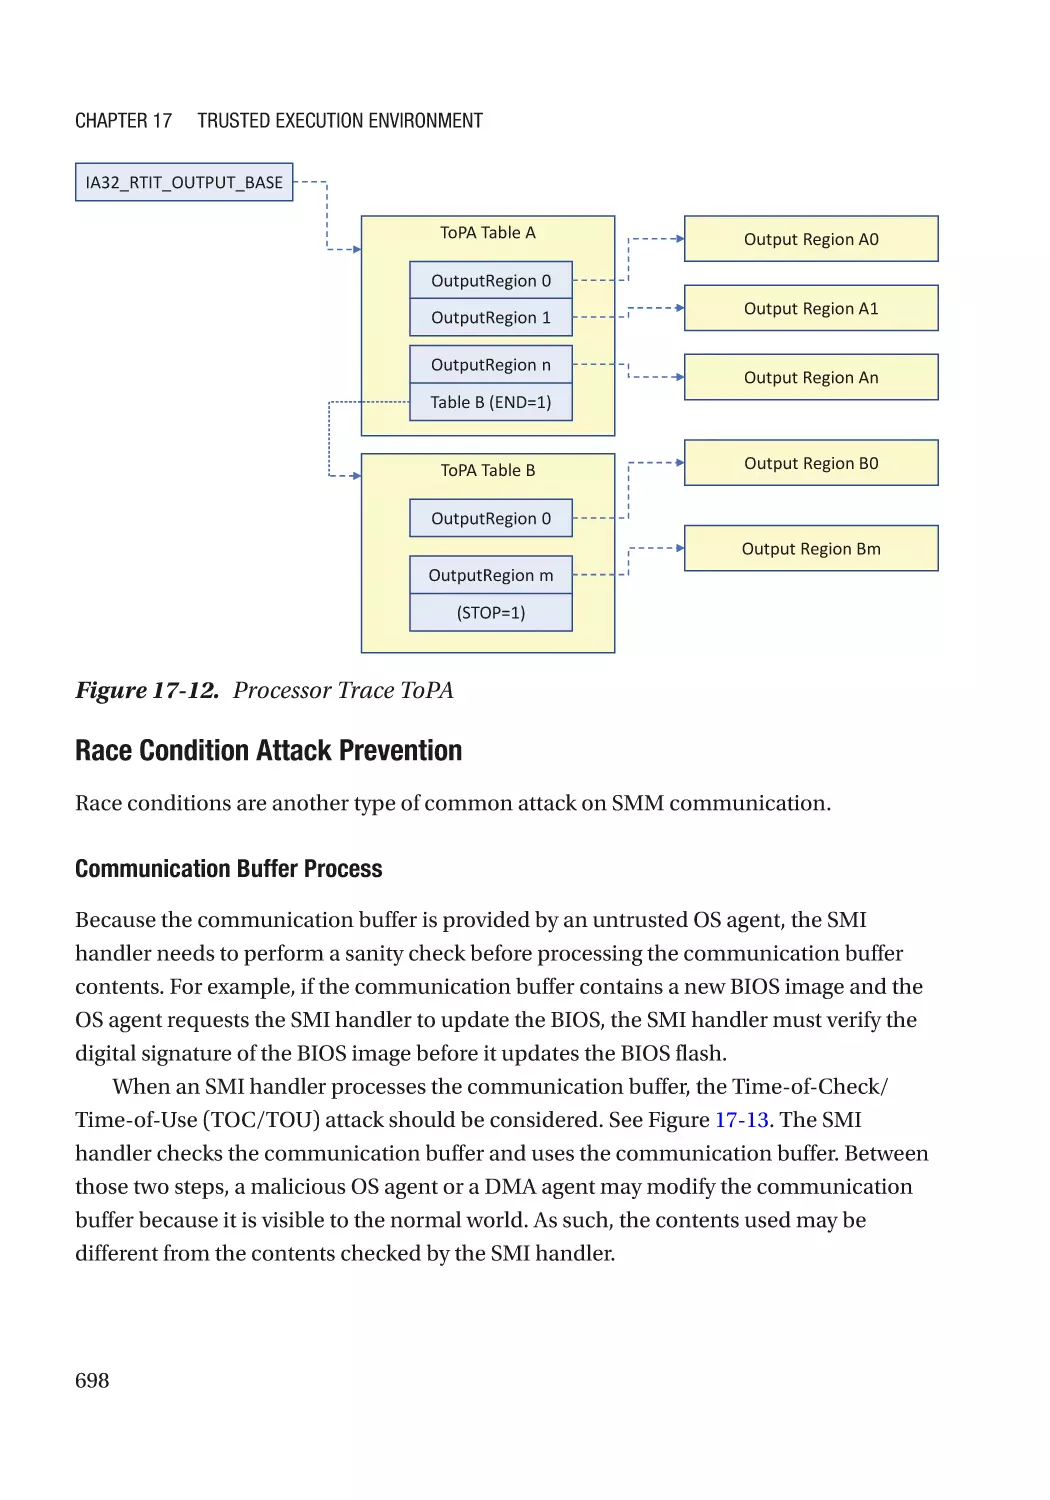 Race Condition Attack Prevention
Communication Buffer Process